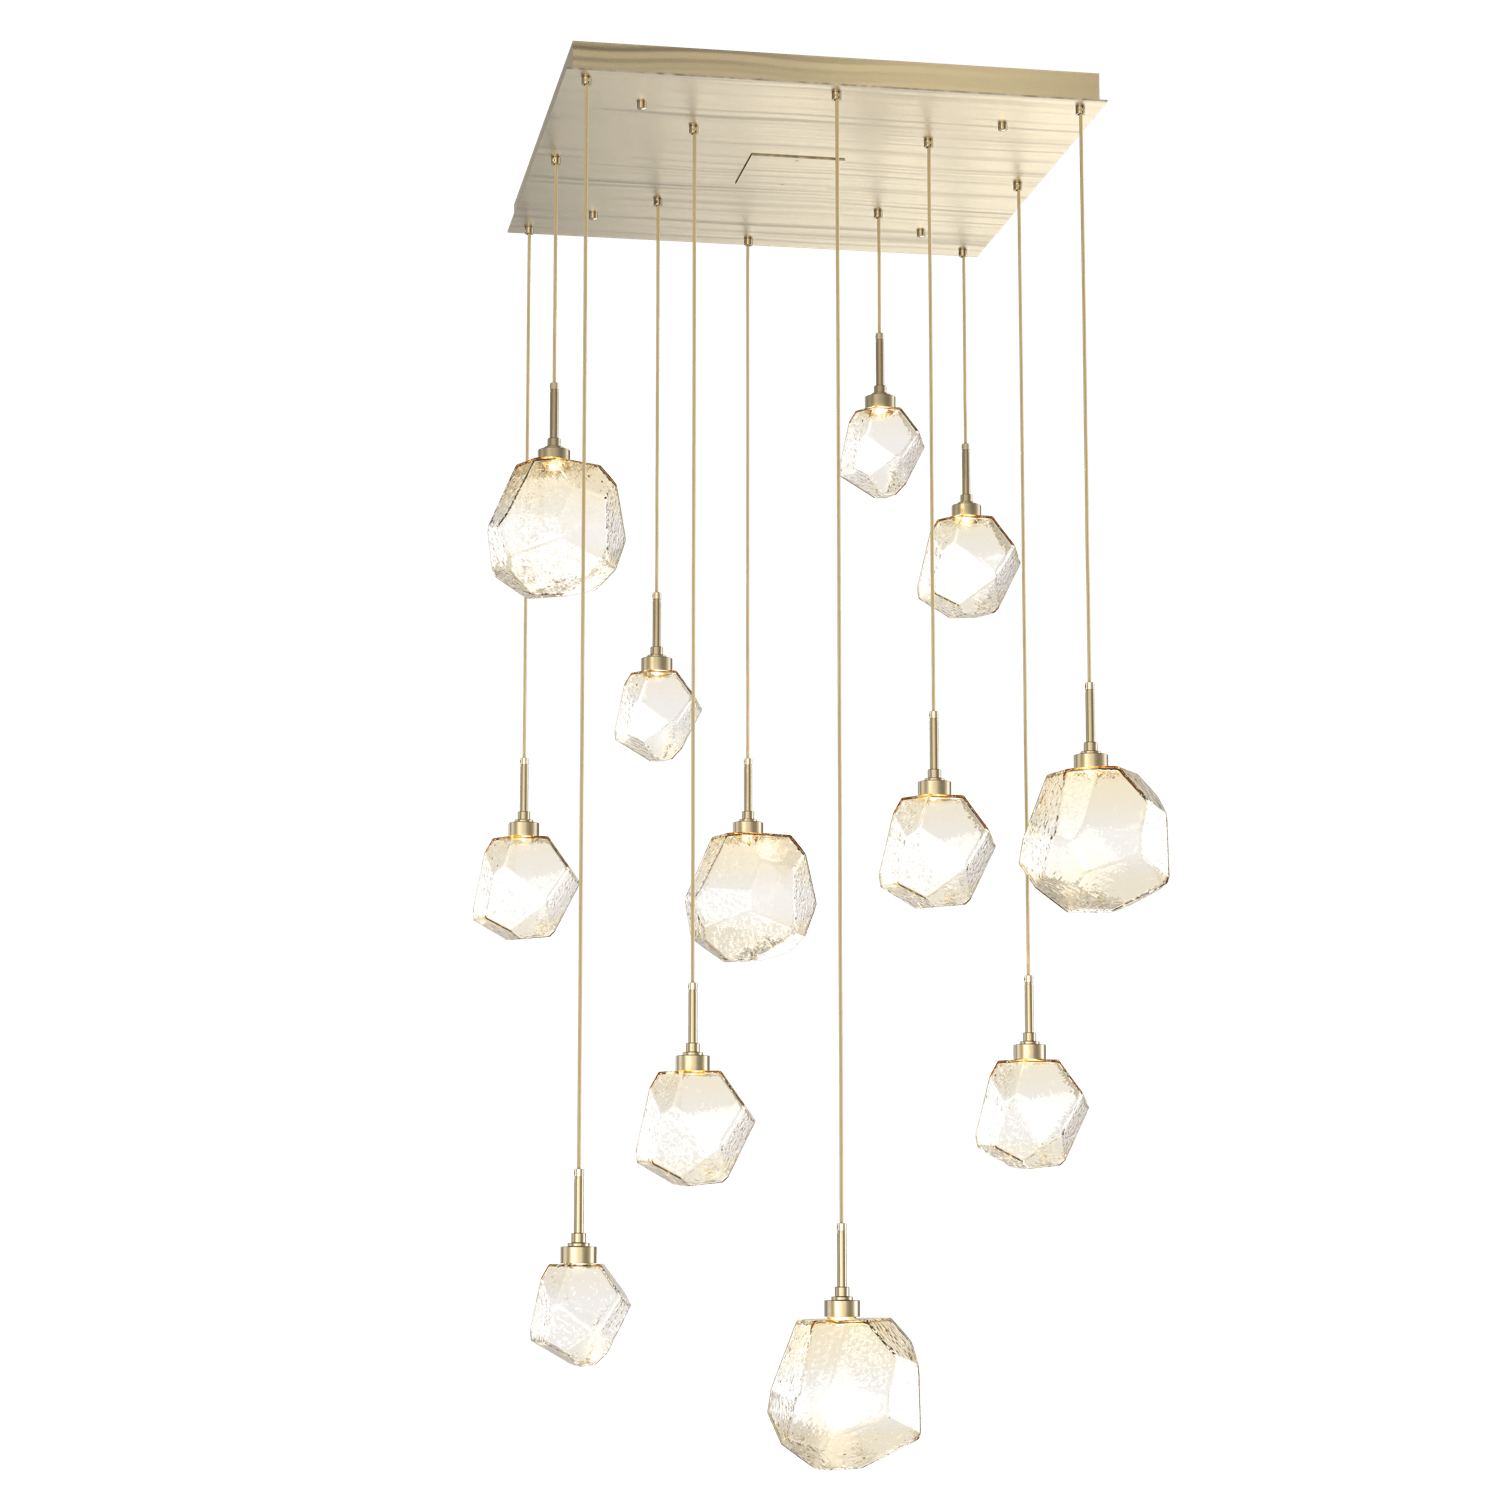 CHB0039-12-HB-A-Hammerton-Studio-Gem-12-light-square-pendant-chandelier-with-heritage-brass-finish-and-amber-blown-glass-shades-and-LED-lamping